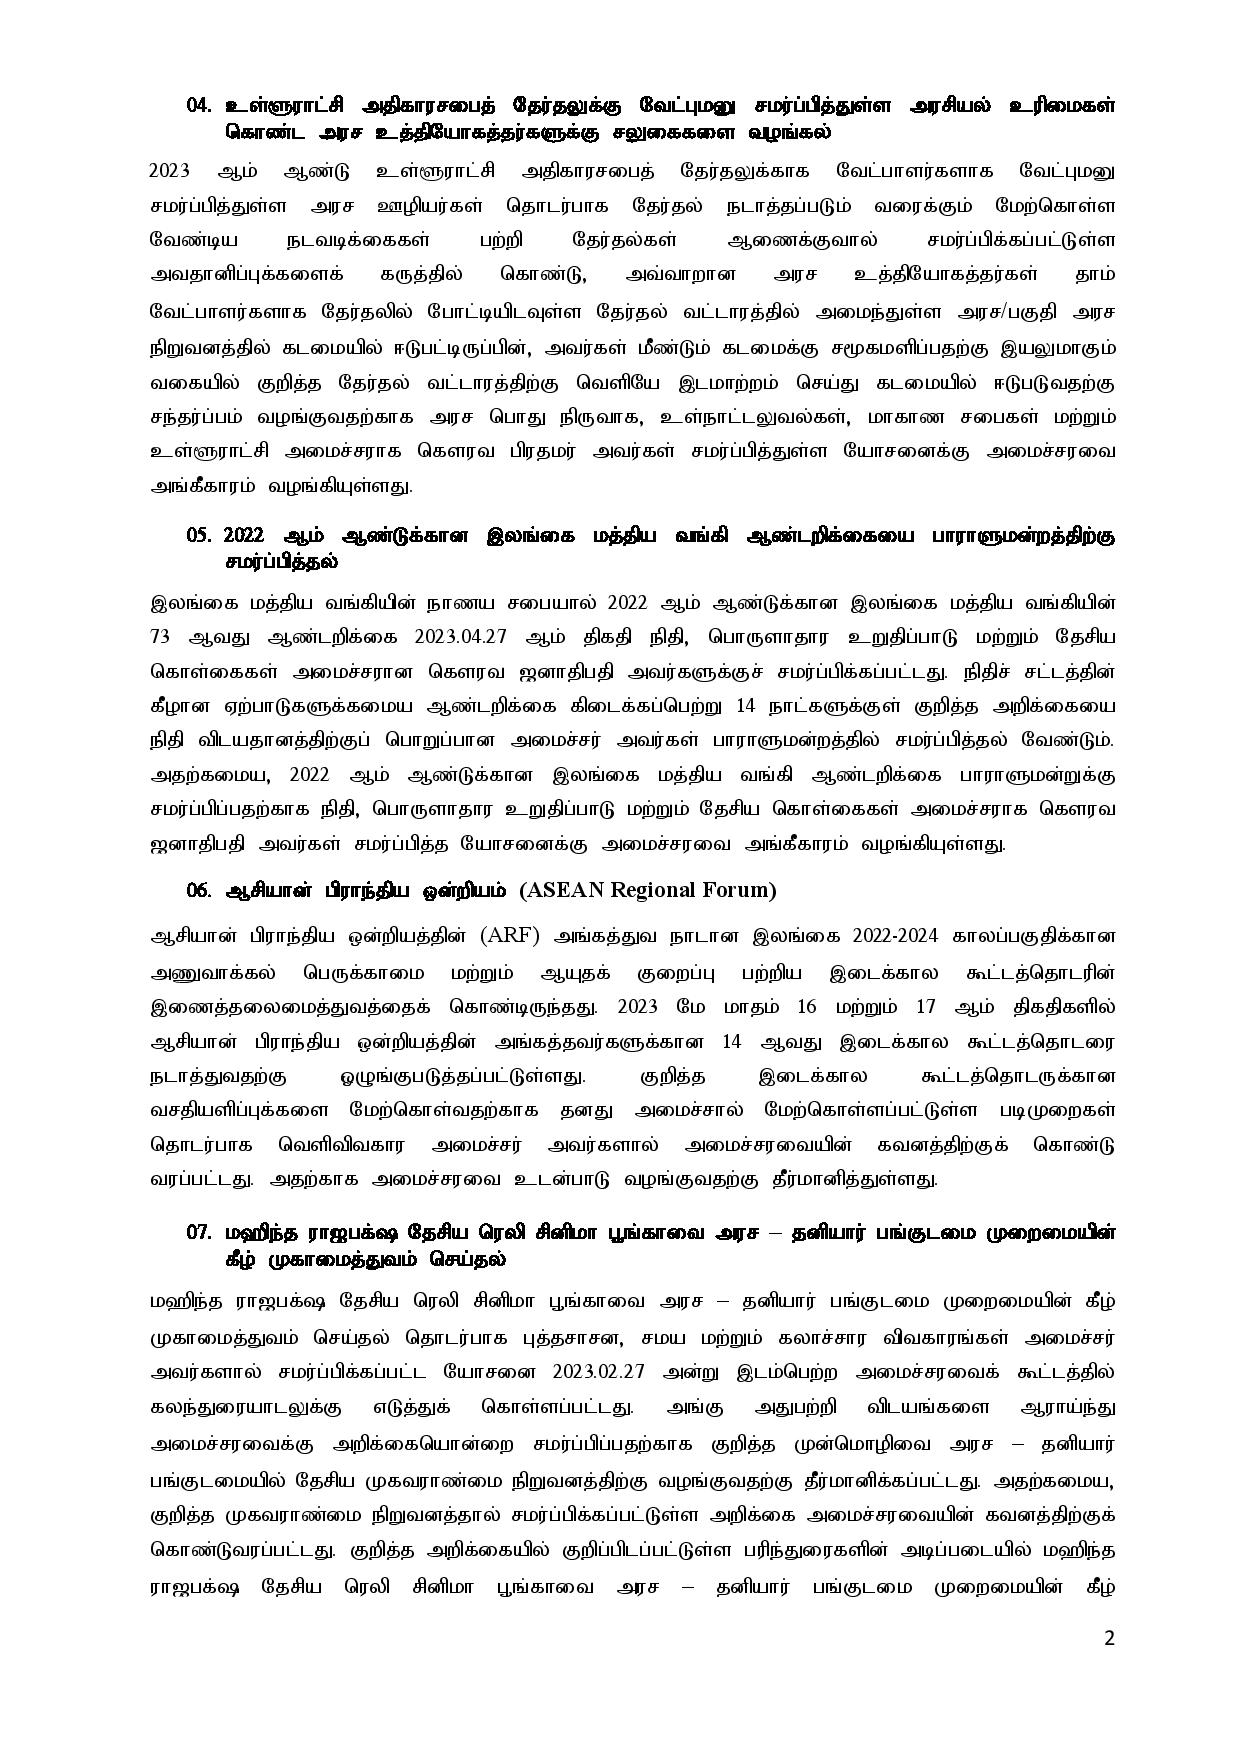 Cabinet Decisions on 02.05.2023 Tamil page 002